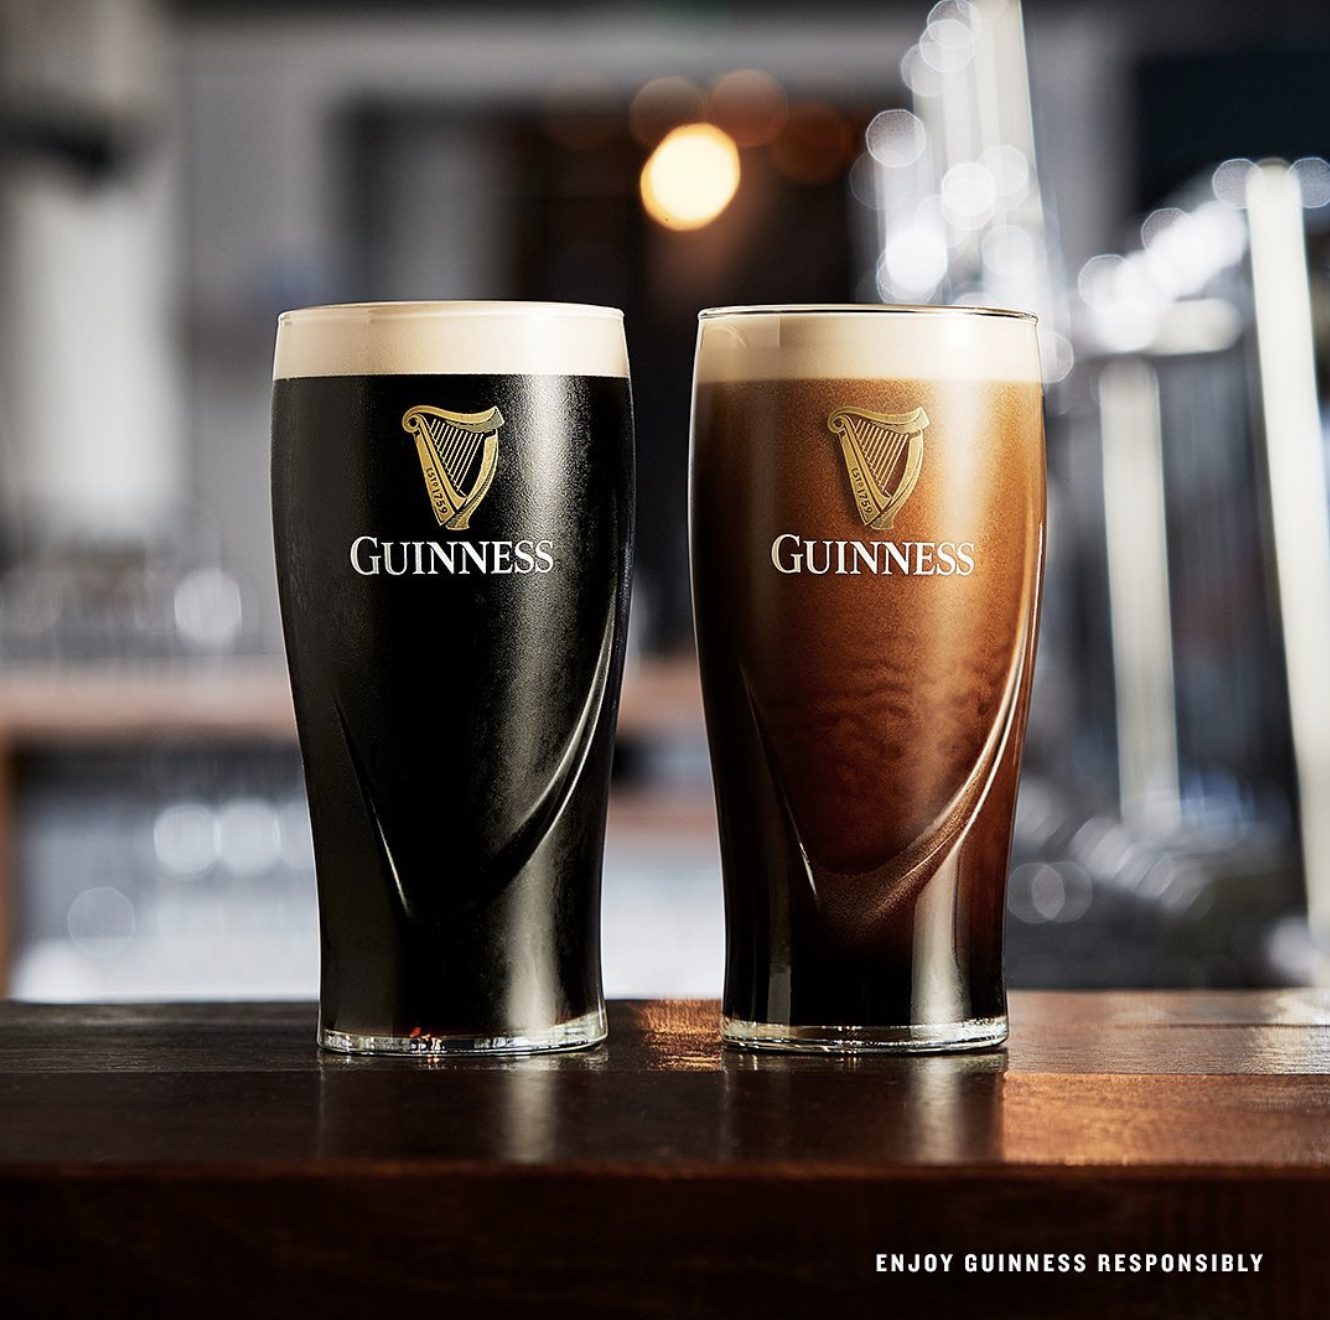 Image of two pints of Guinness